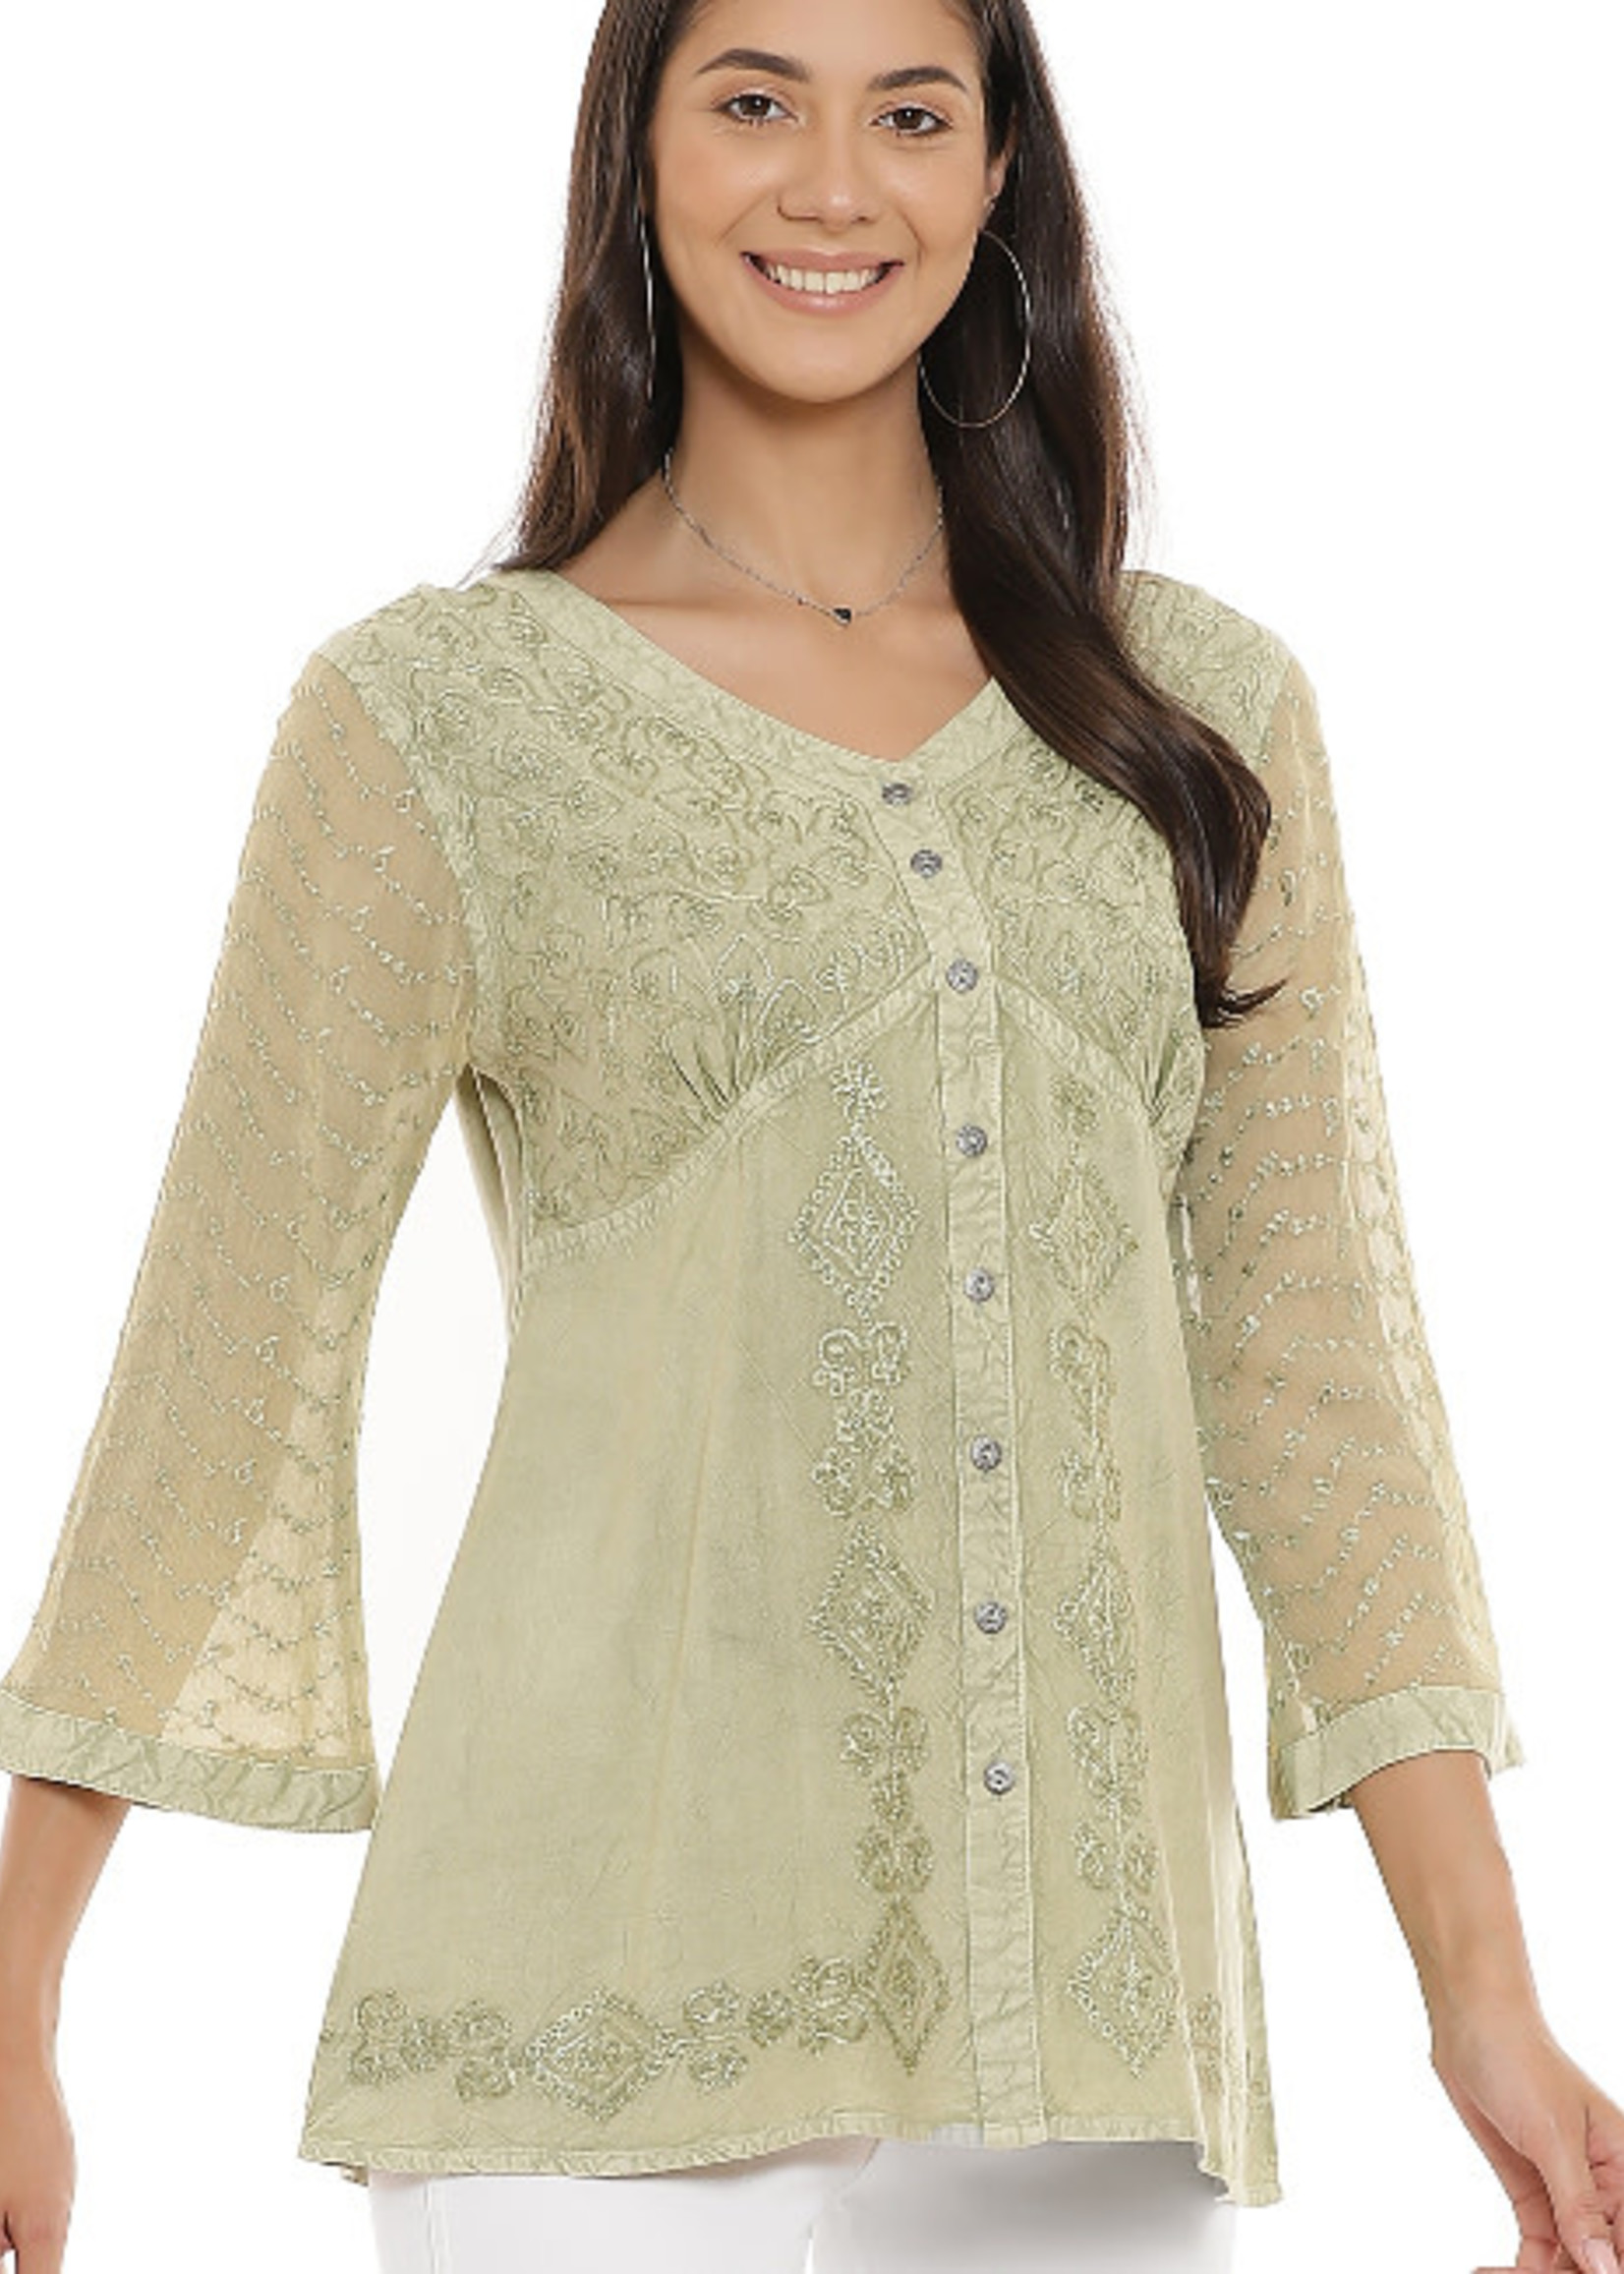 Parsley and Sage Green Embroidered Button Down Shirt